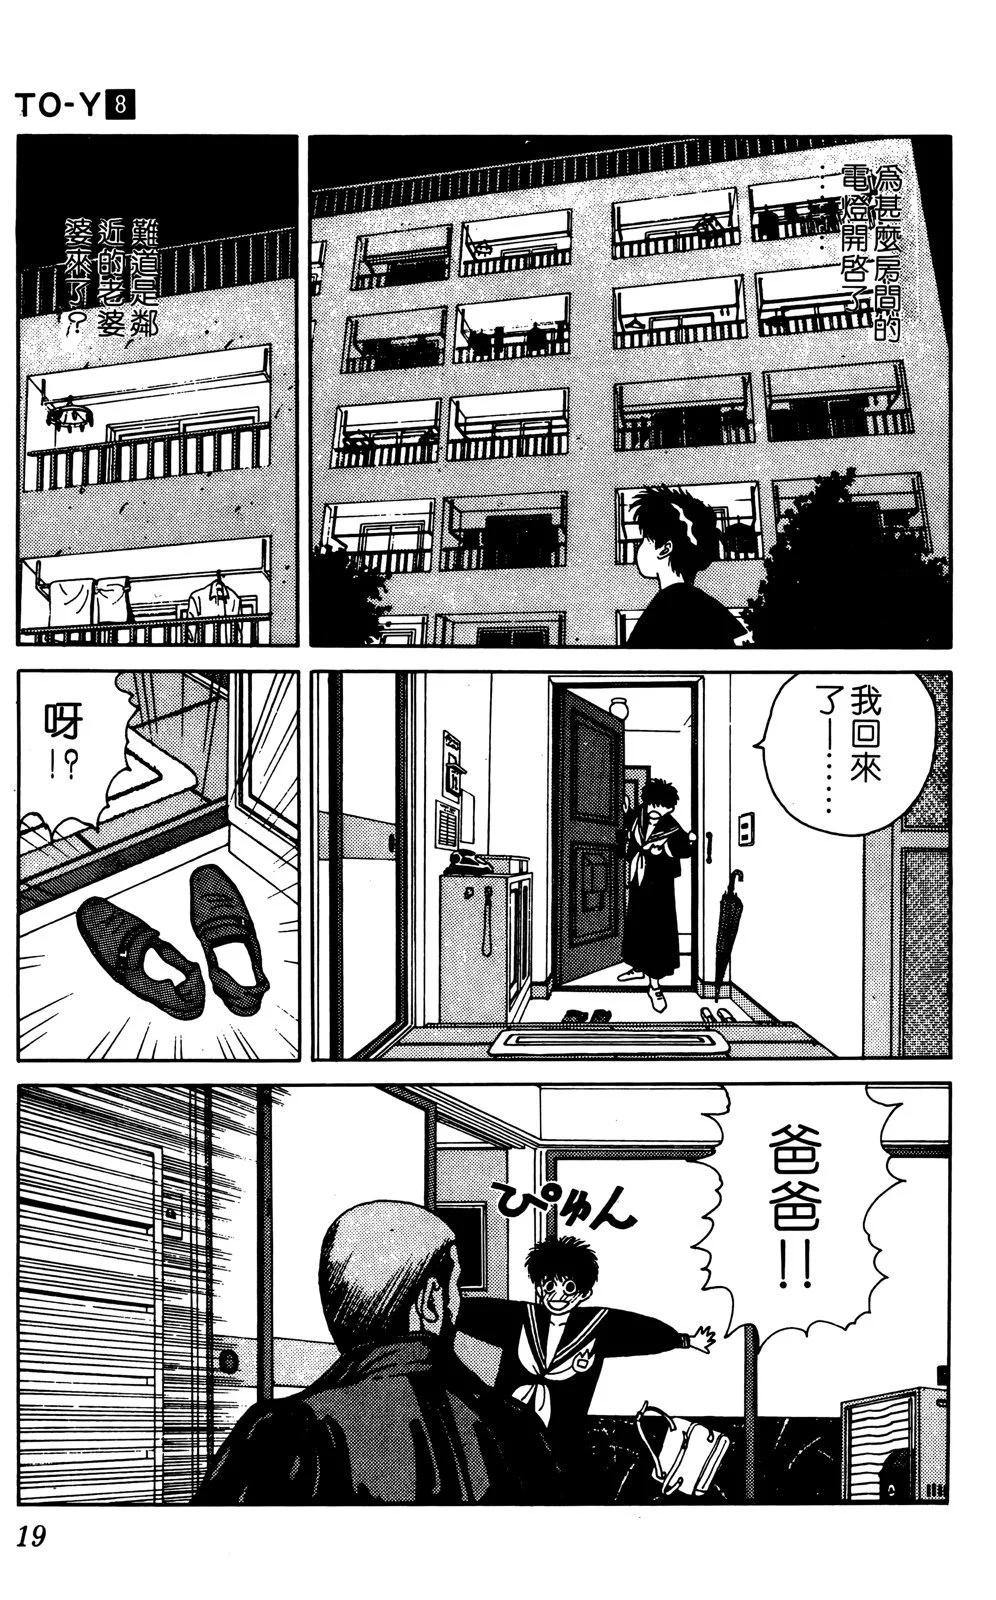 TO-Y - 第08卷(1/4) - 6